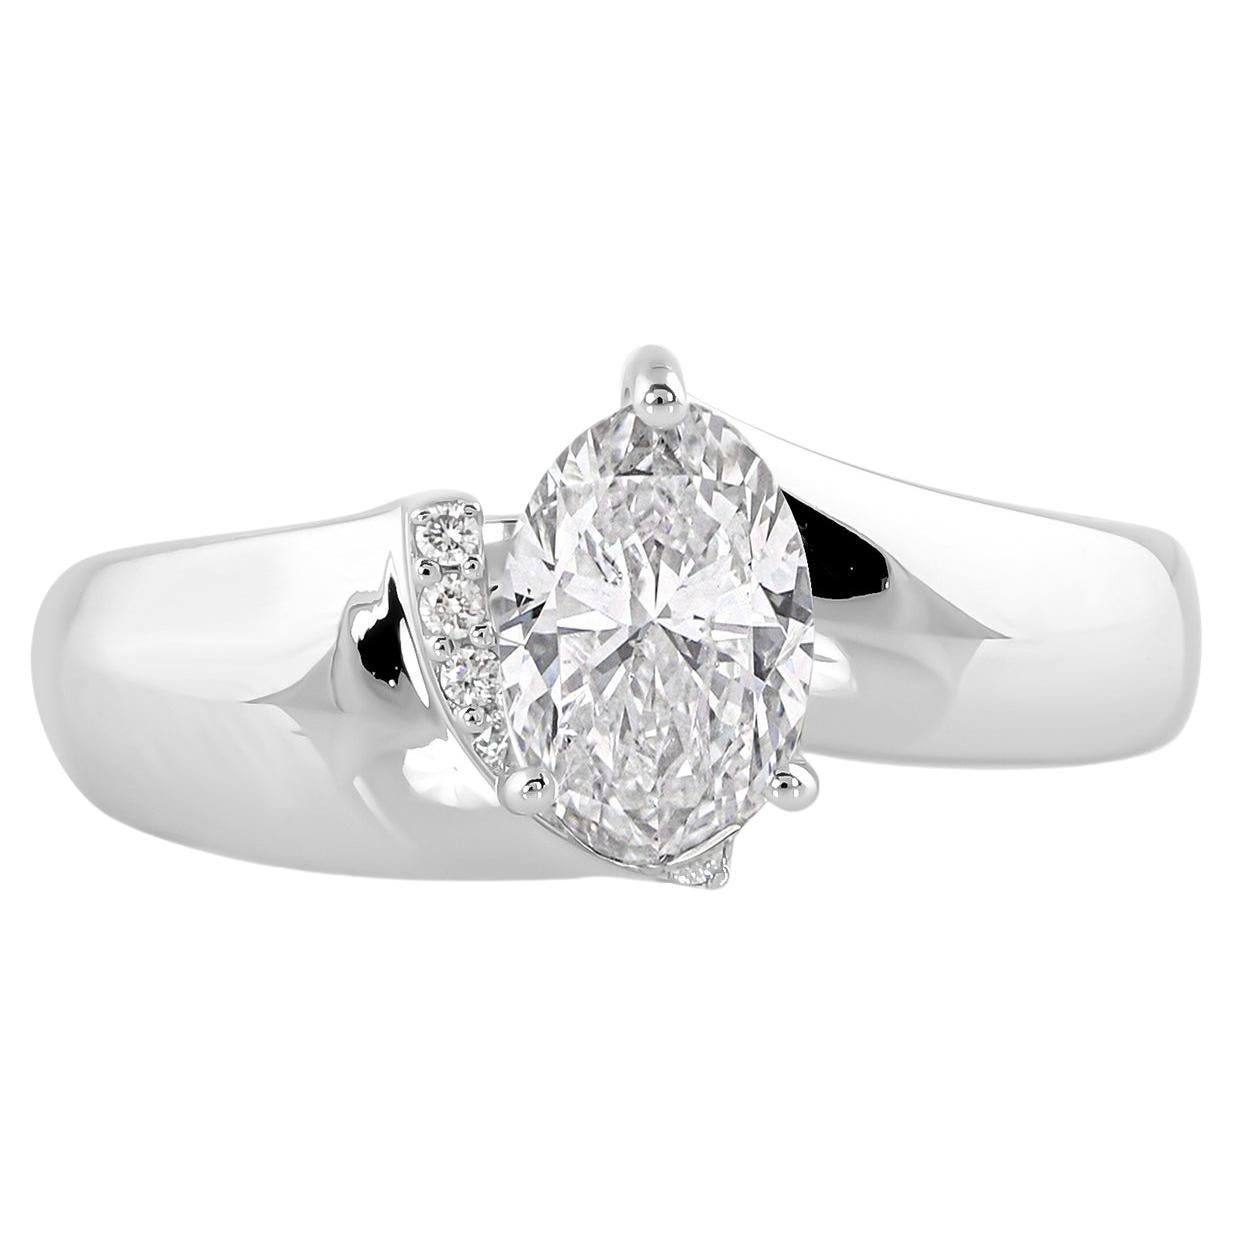 Natural 0.95 Carat Solitaire Diamond Band Ring 14 Karat White Gold Fine Jewelry For Sale